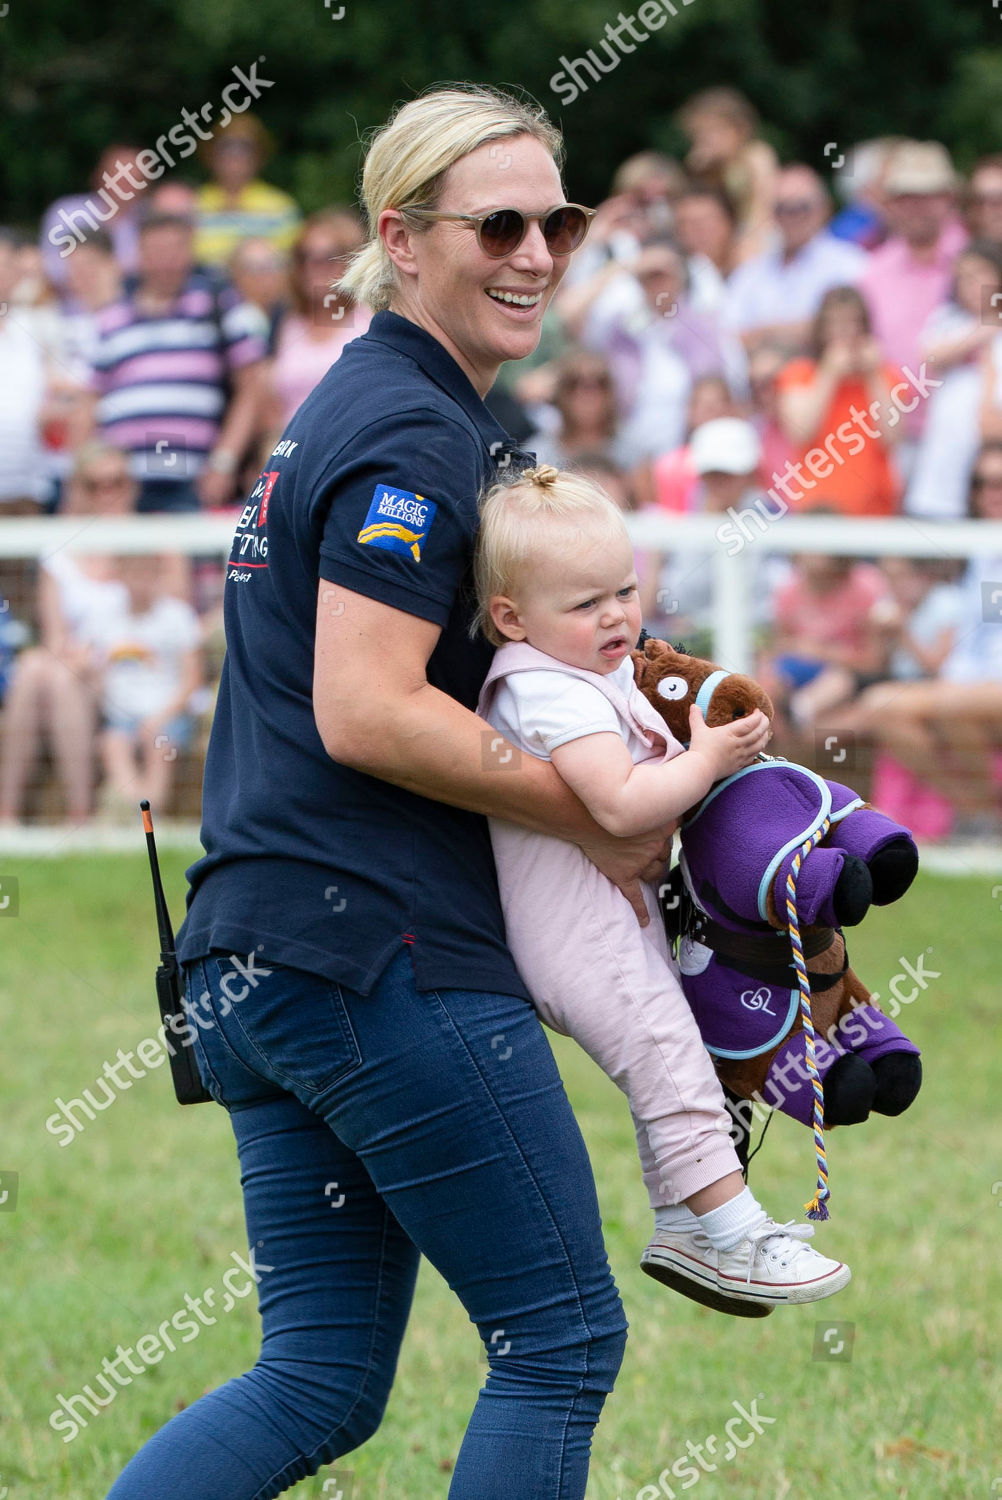 festival-of-british-eventing-day2-gatcombe-gloucestershire-uk-shutterstock-editorial-10353523bs.jpg